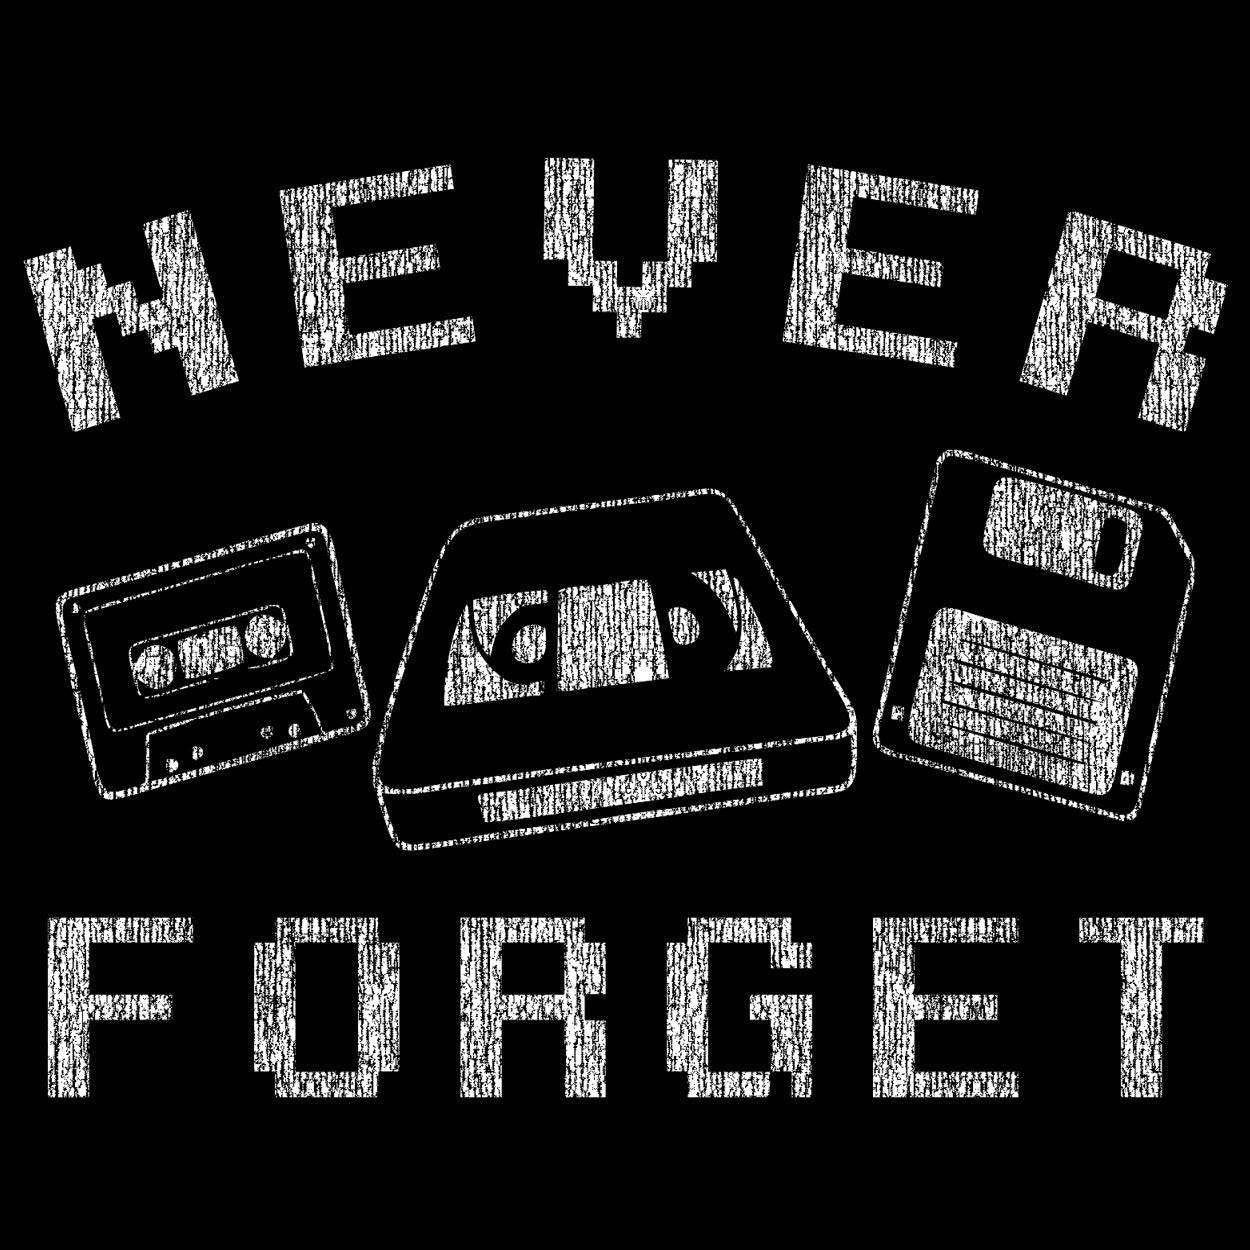 Never Forget Tshirt - Donkey Tees